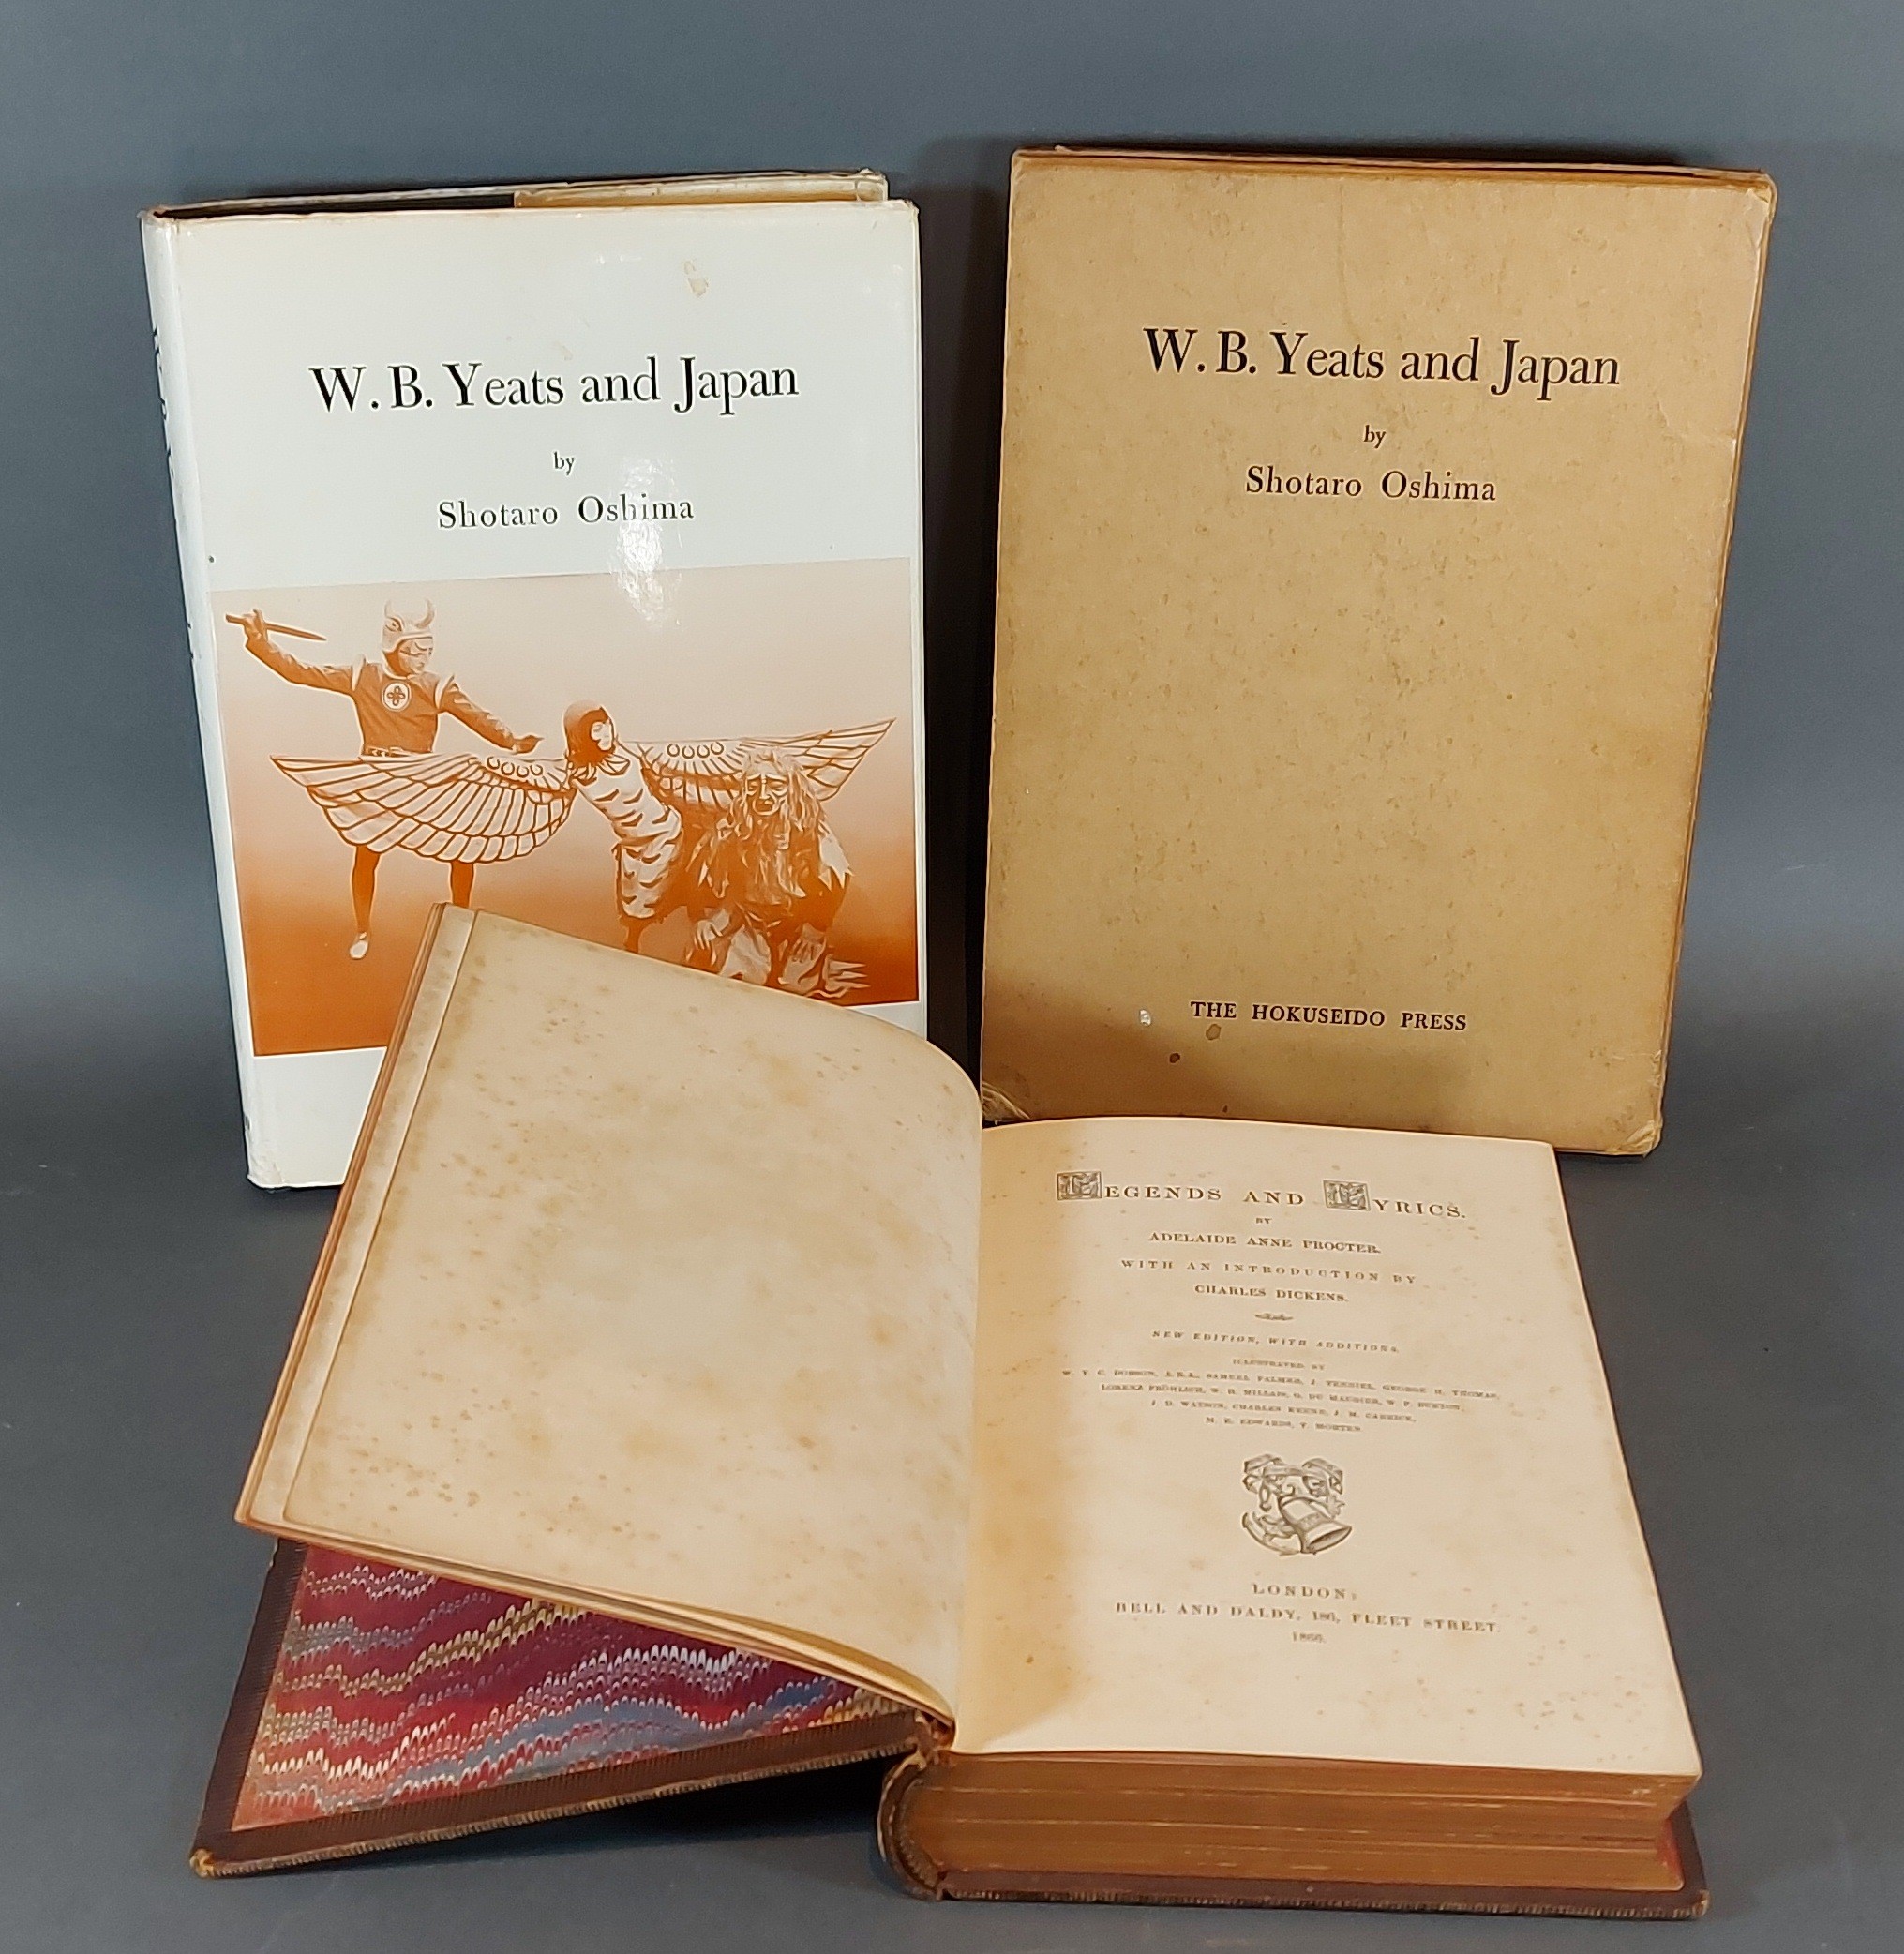 One volume Legends and Lyrics by Adelaide Anne Proctor together with one volume W.B. Yeats and Japan